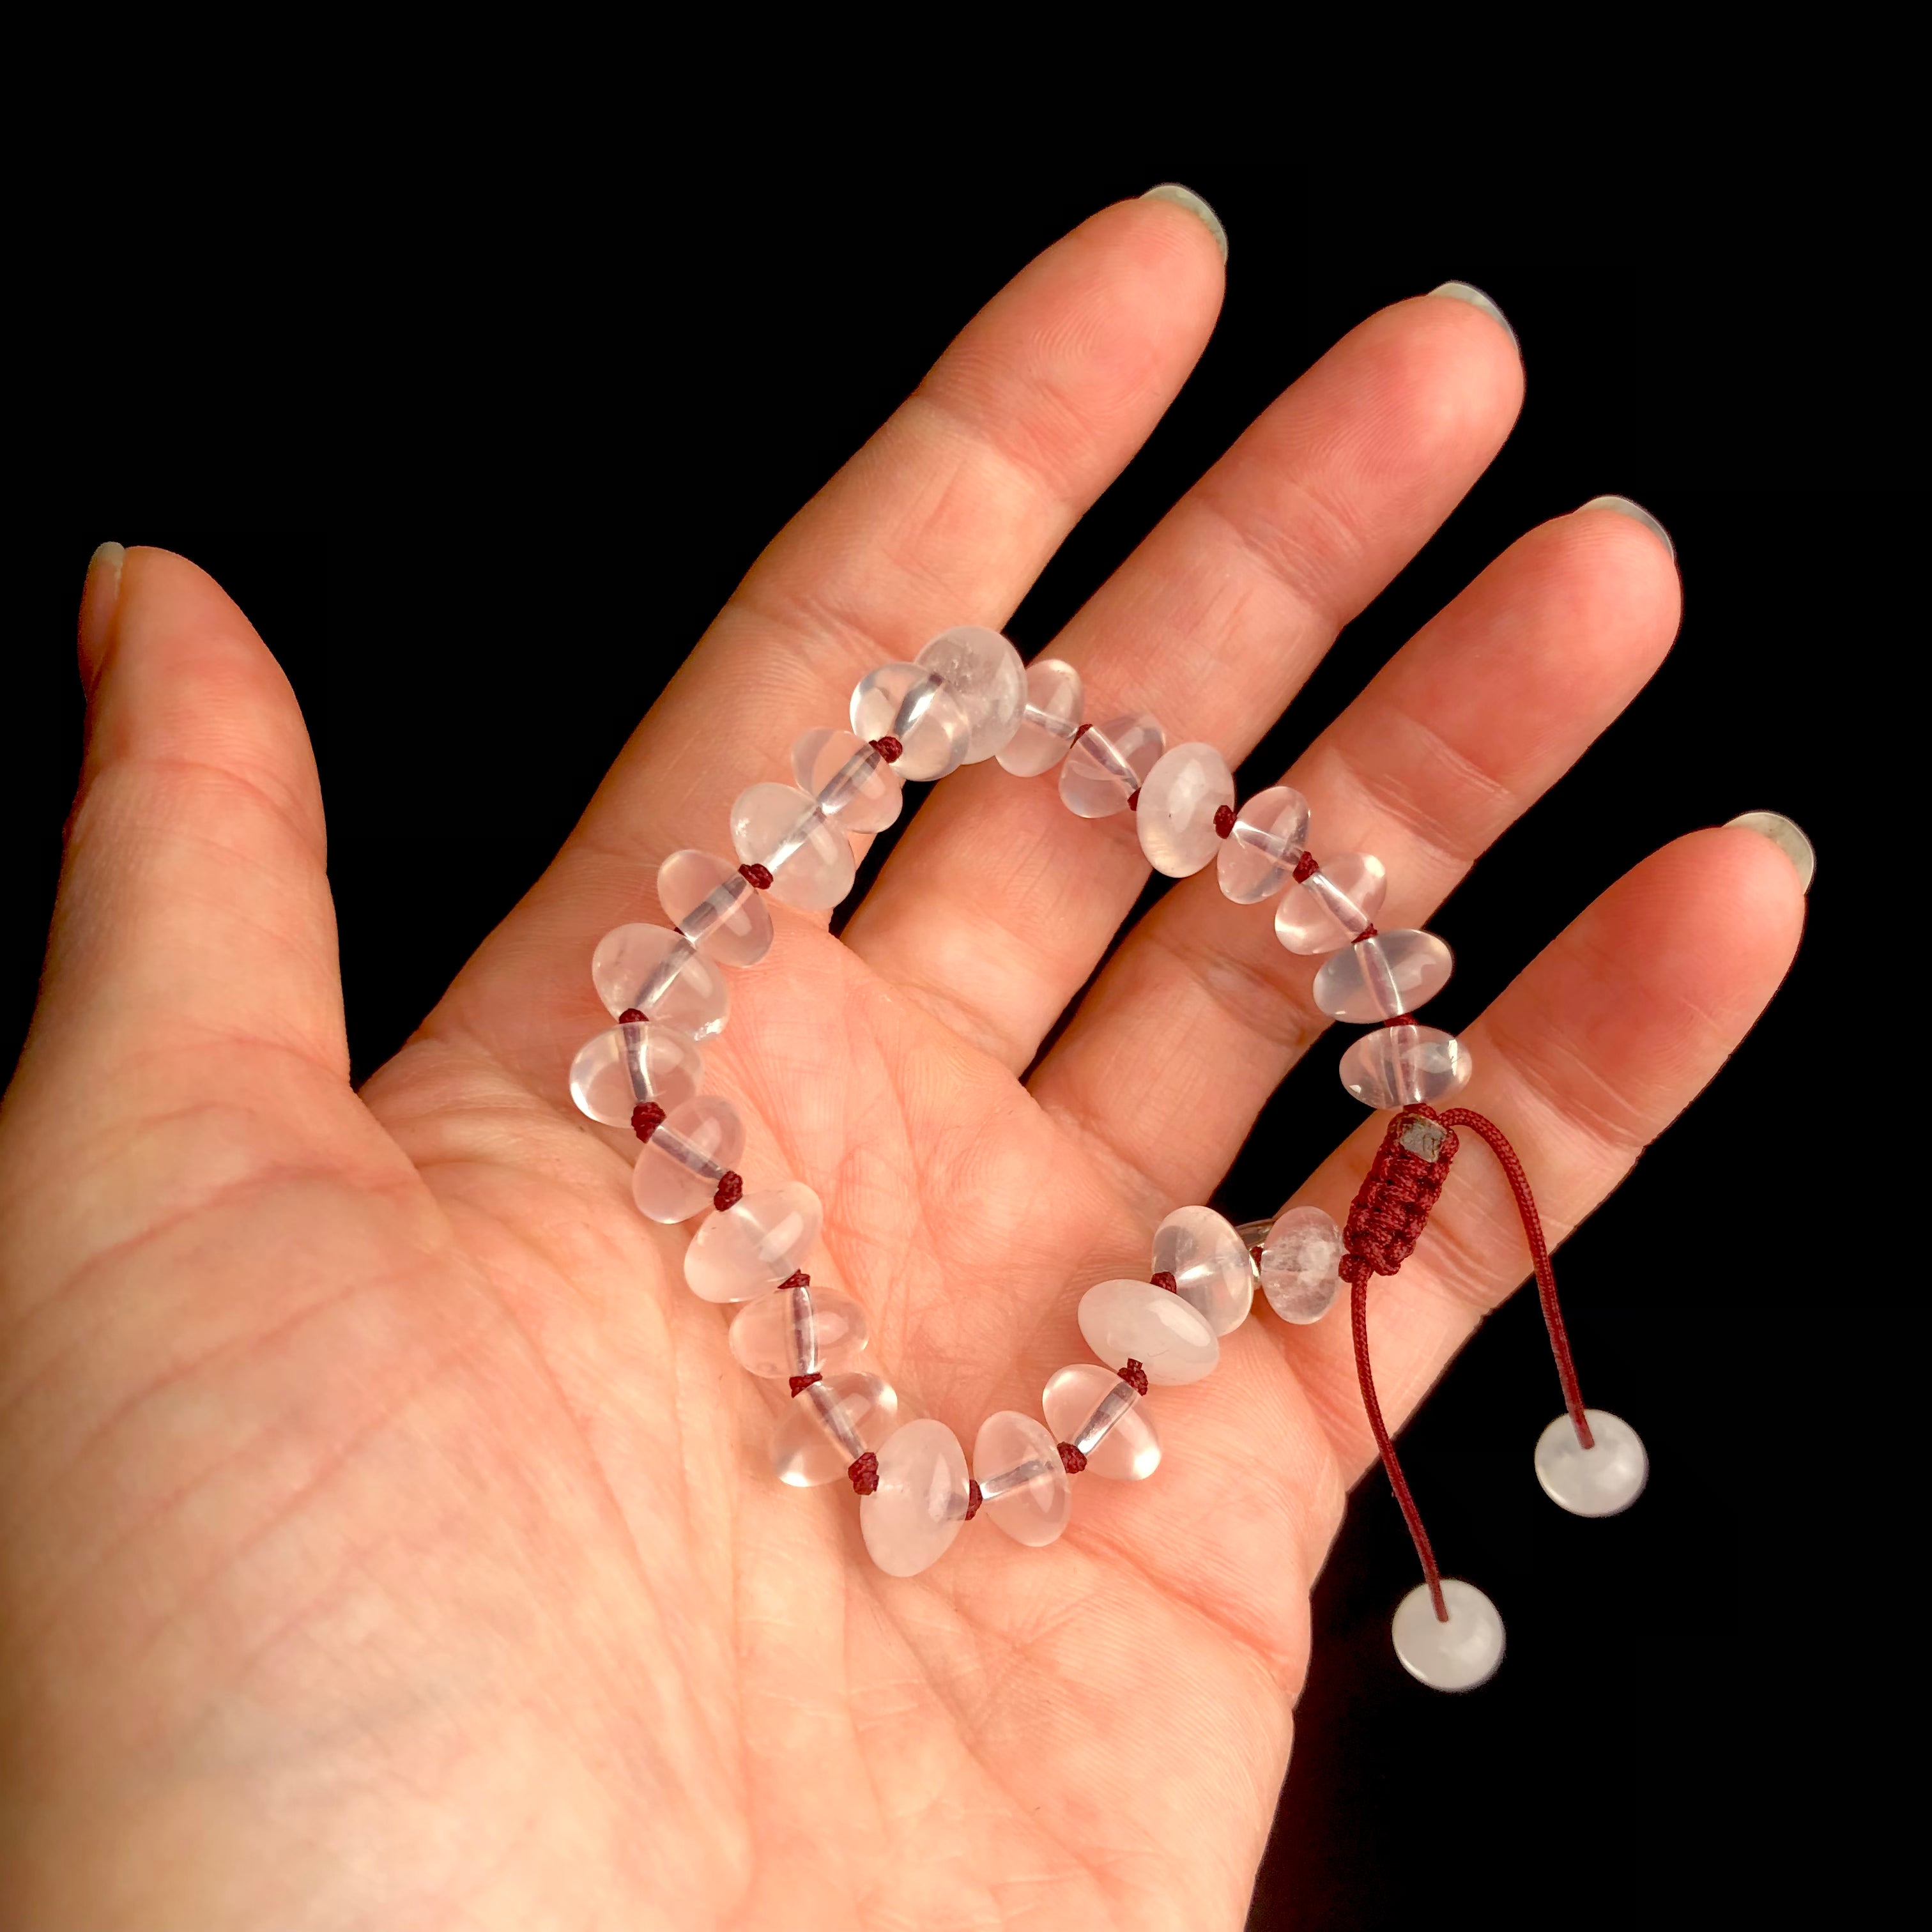 Translucent light pink colored stone bracelet on dark red knotted cord shown in hand